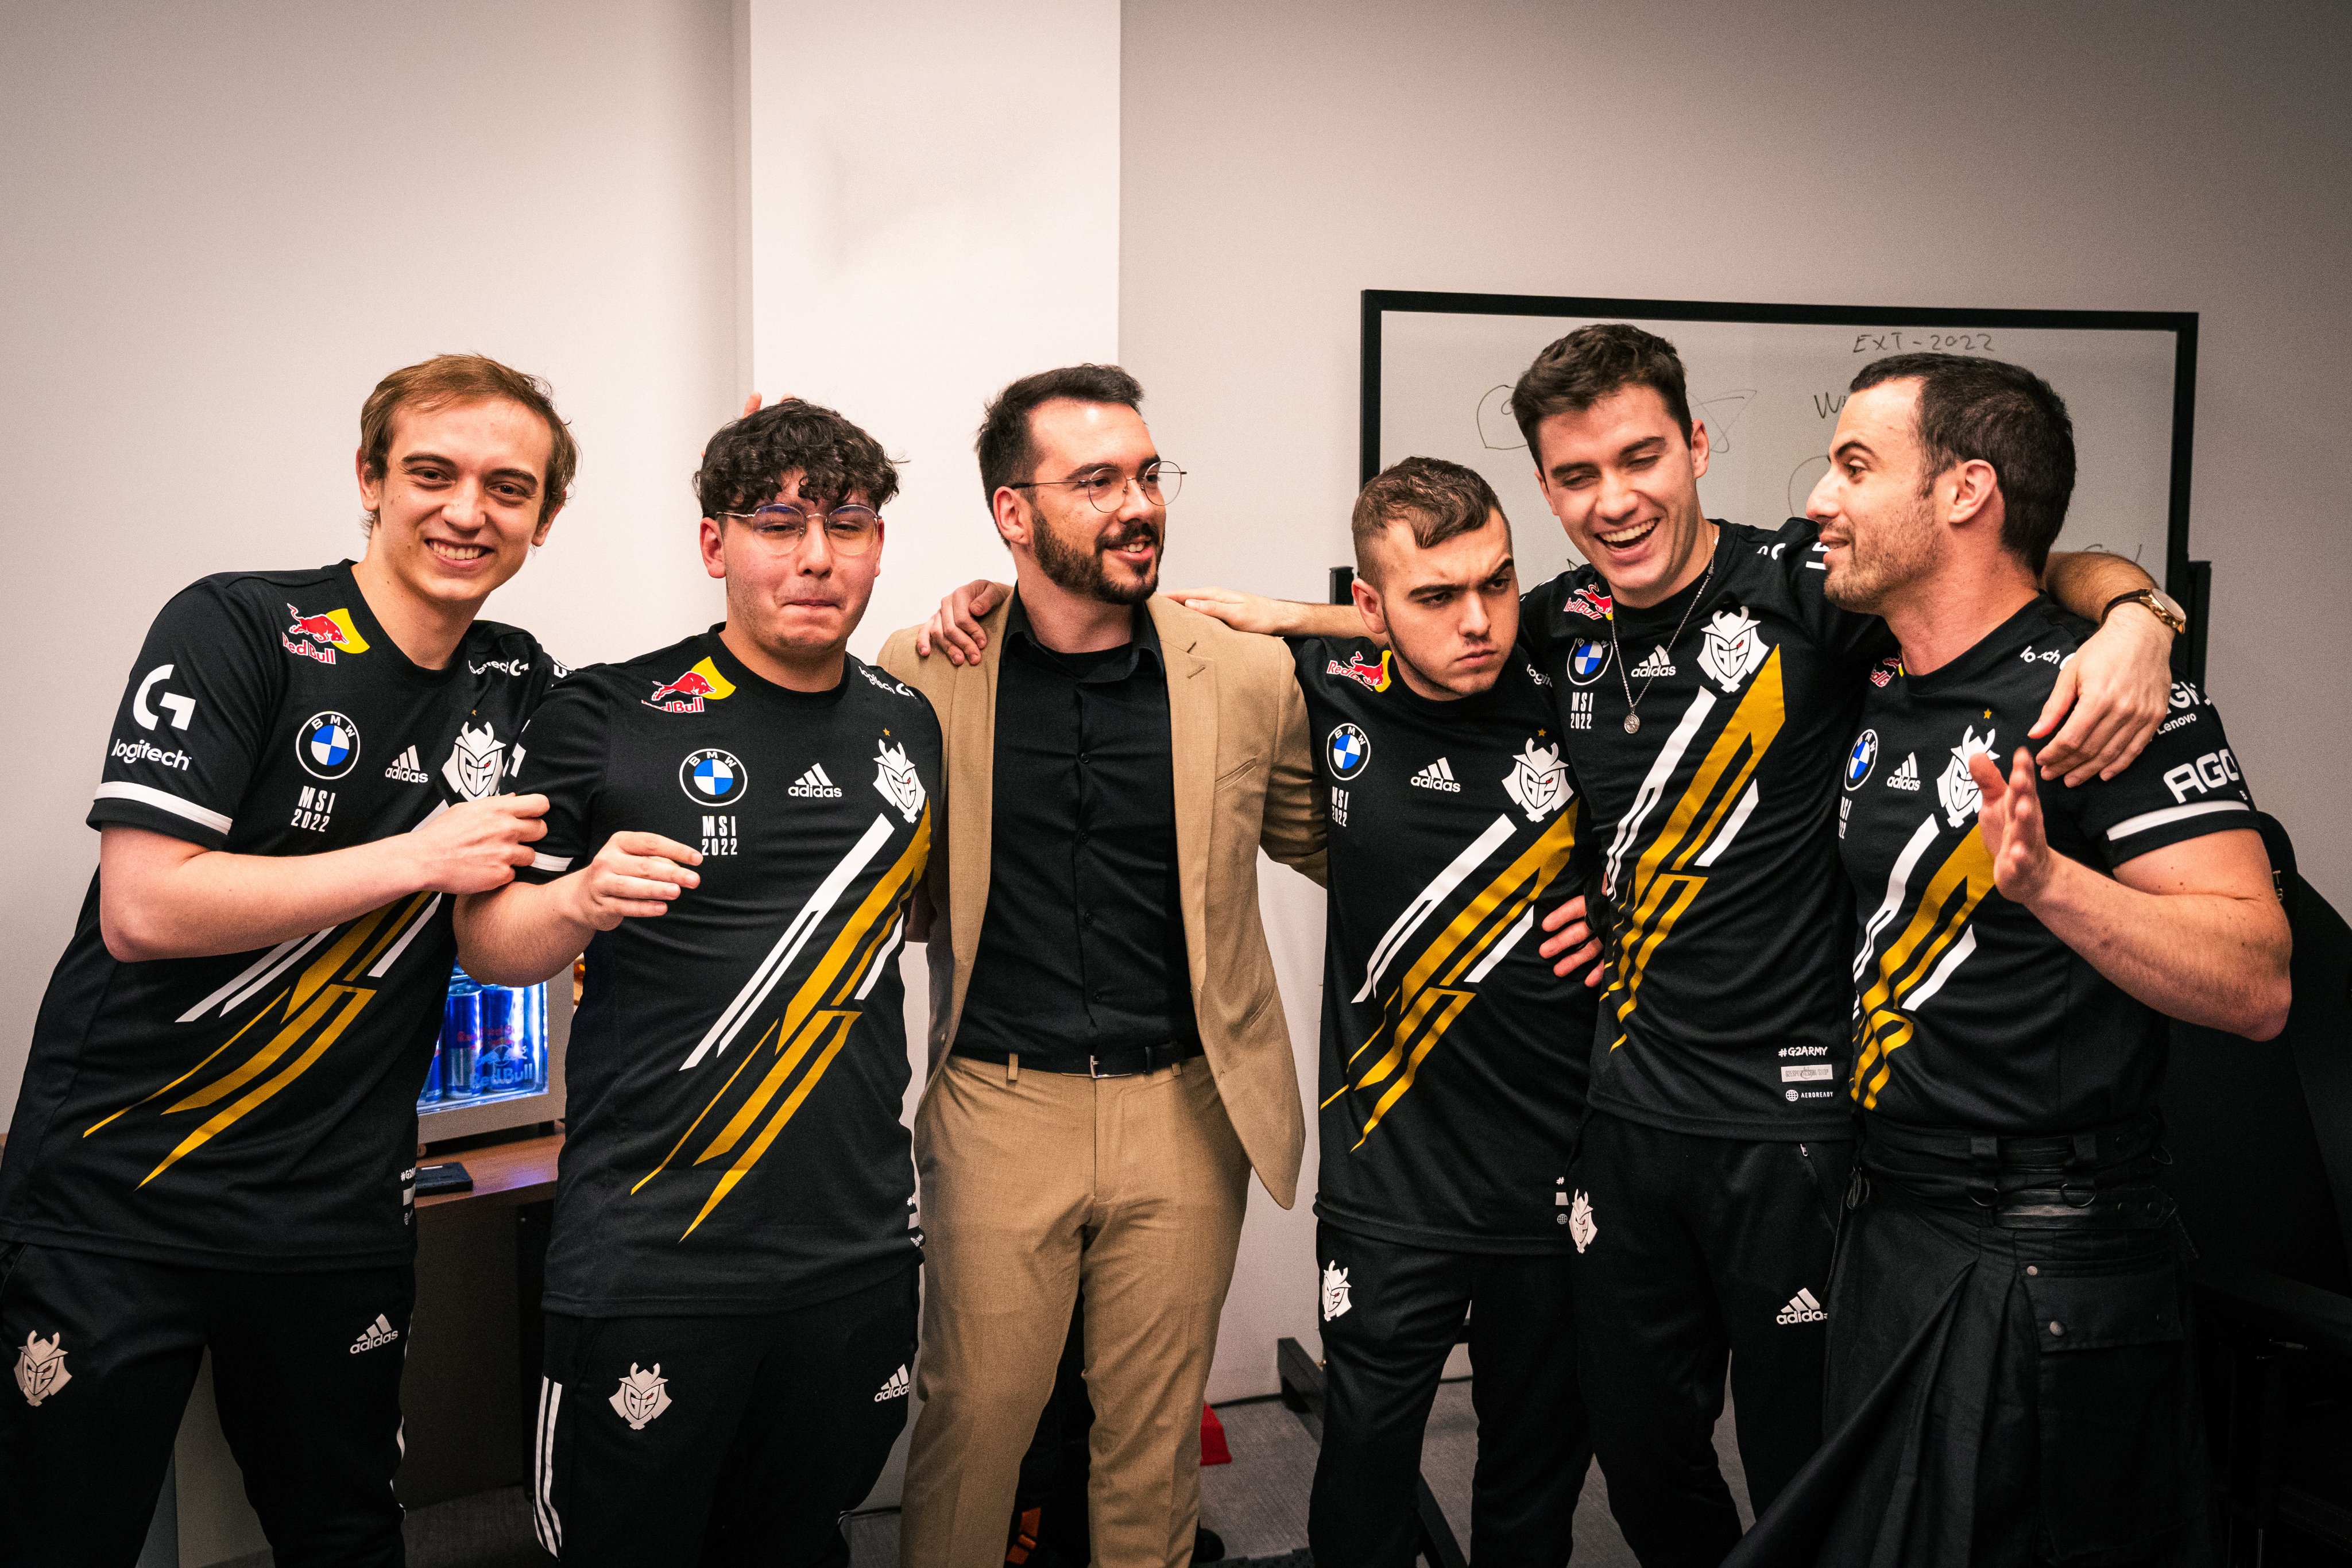 Royal Never Give Up crowned MSI 2022 champions - Dexerto